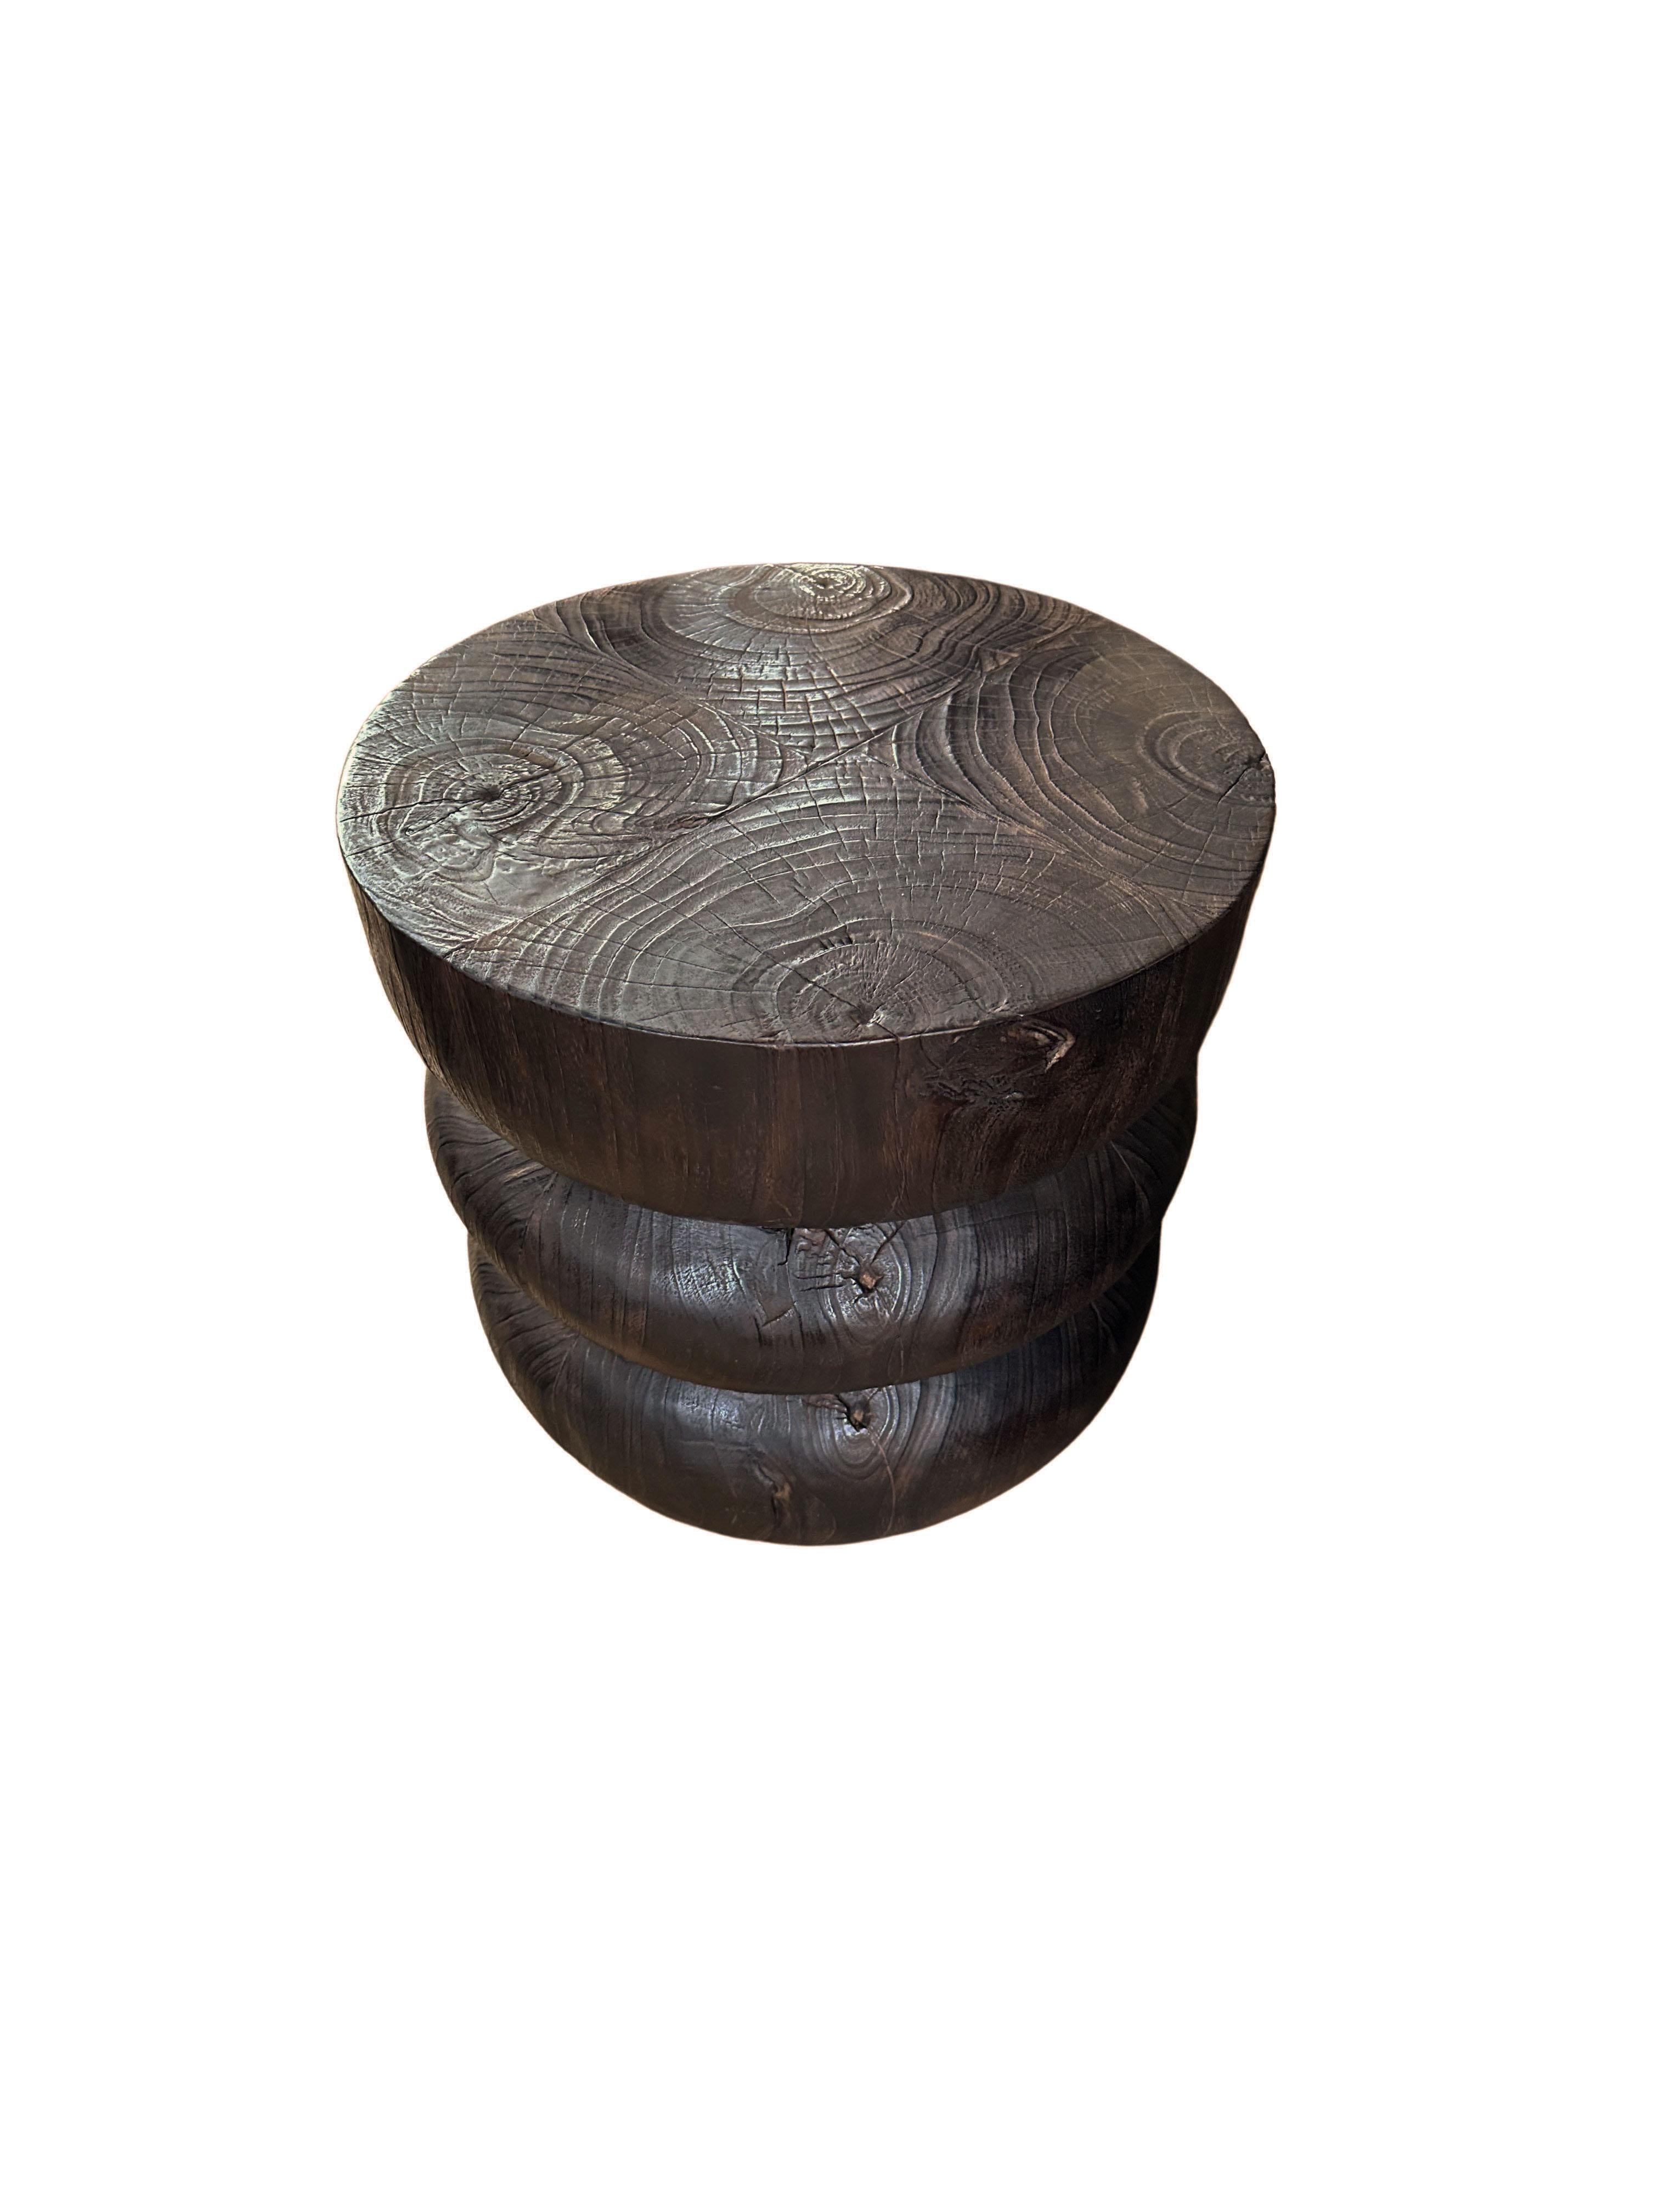 A wonderfully sculpted side table, crafted from a single block of teak wood. It features wonderful wood textures as well and carved detailing that wrap around its sides. To achieve its pigment the wood was burnt several times and finished with a